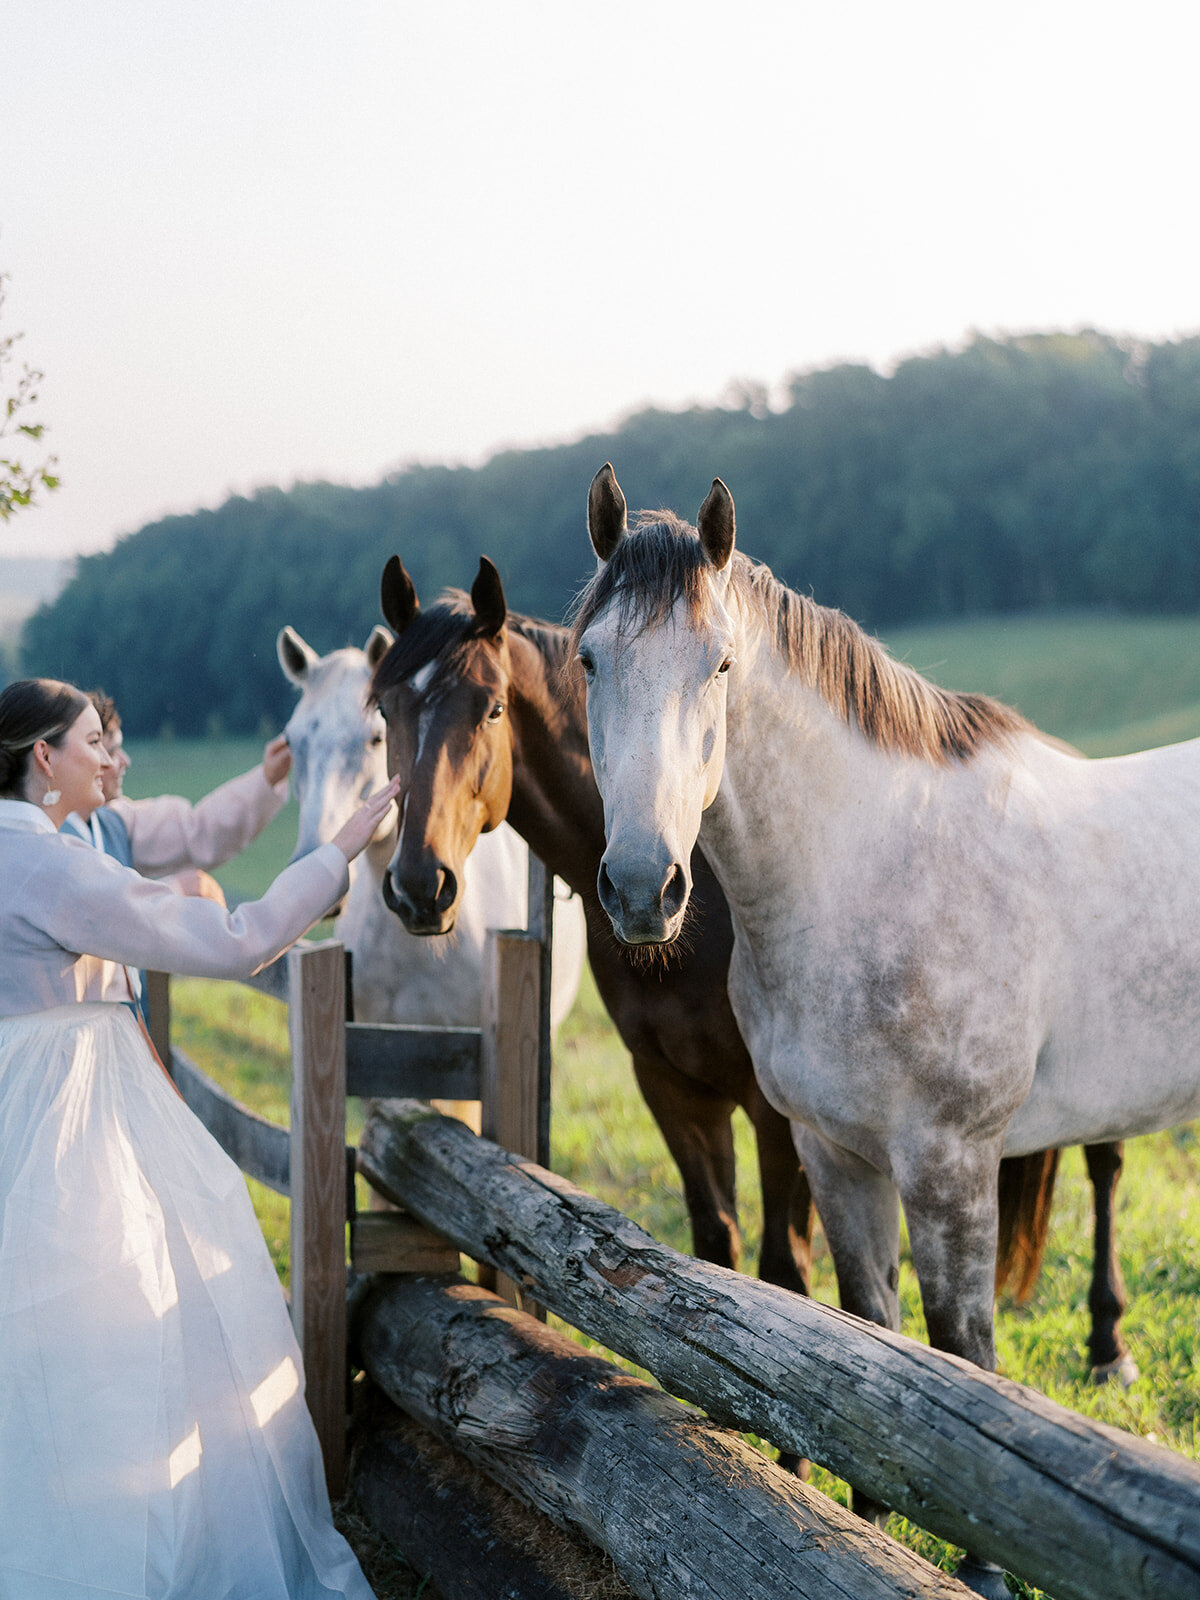 Bride and groom petting horses at Harford Hills.